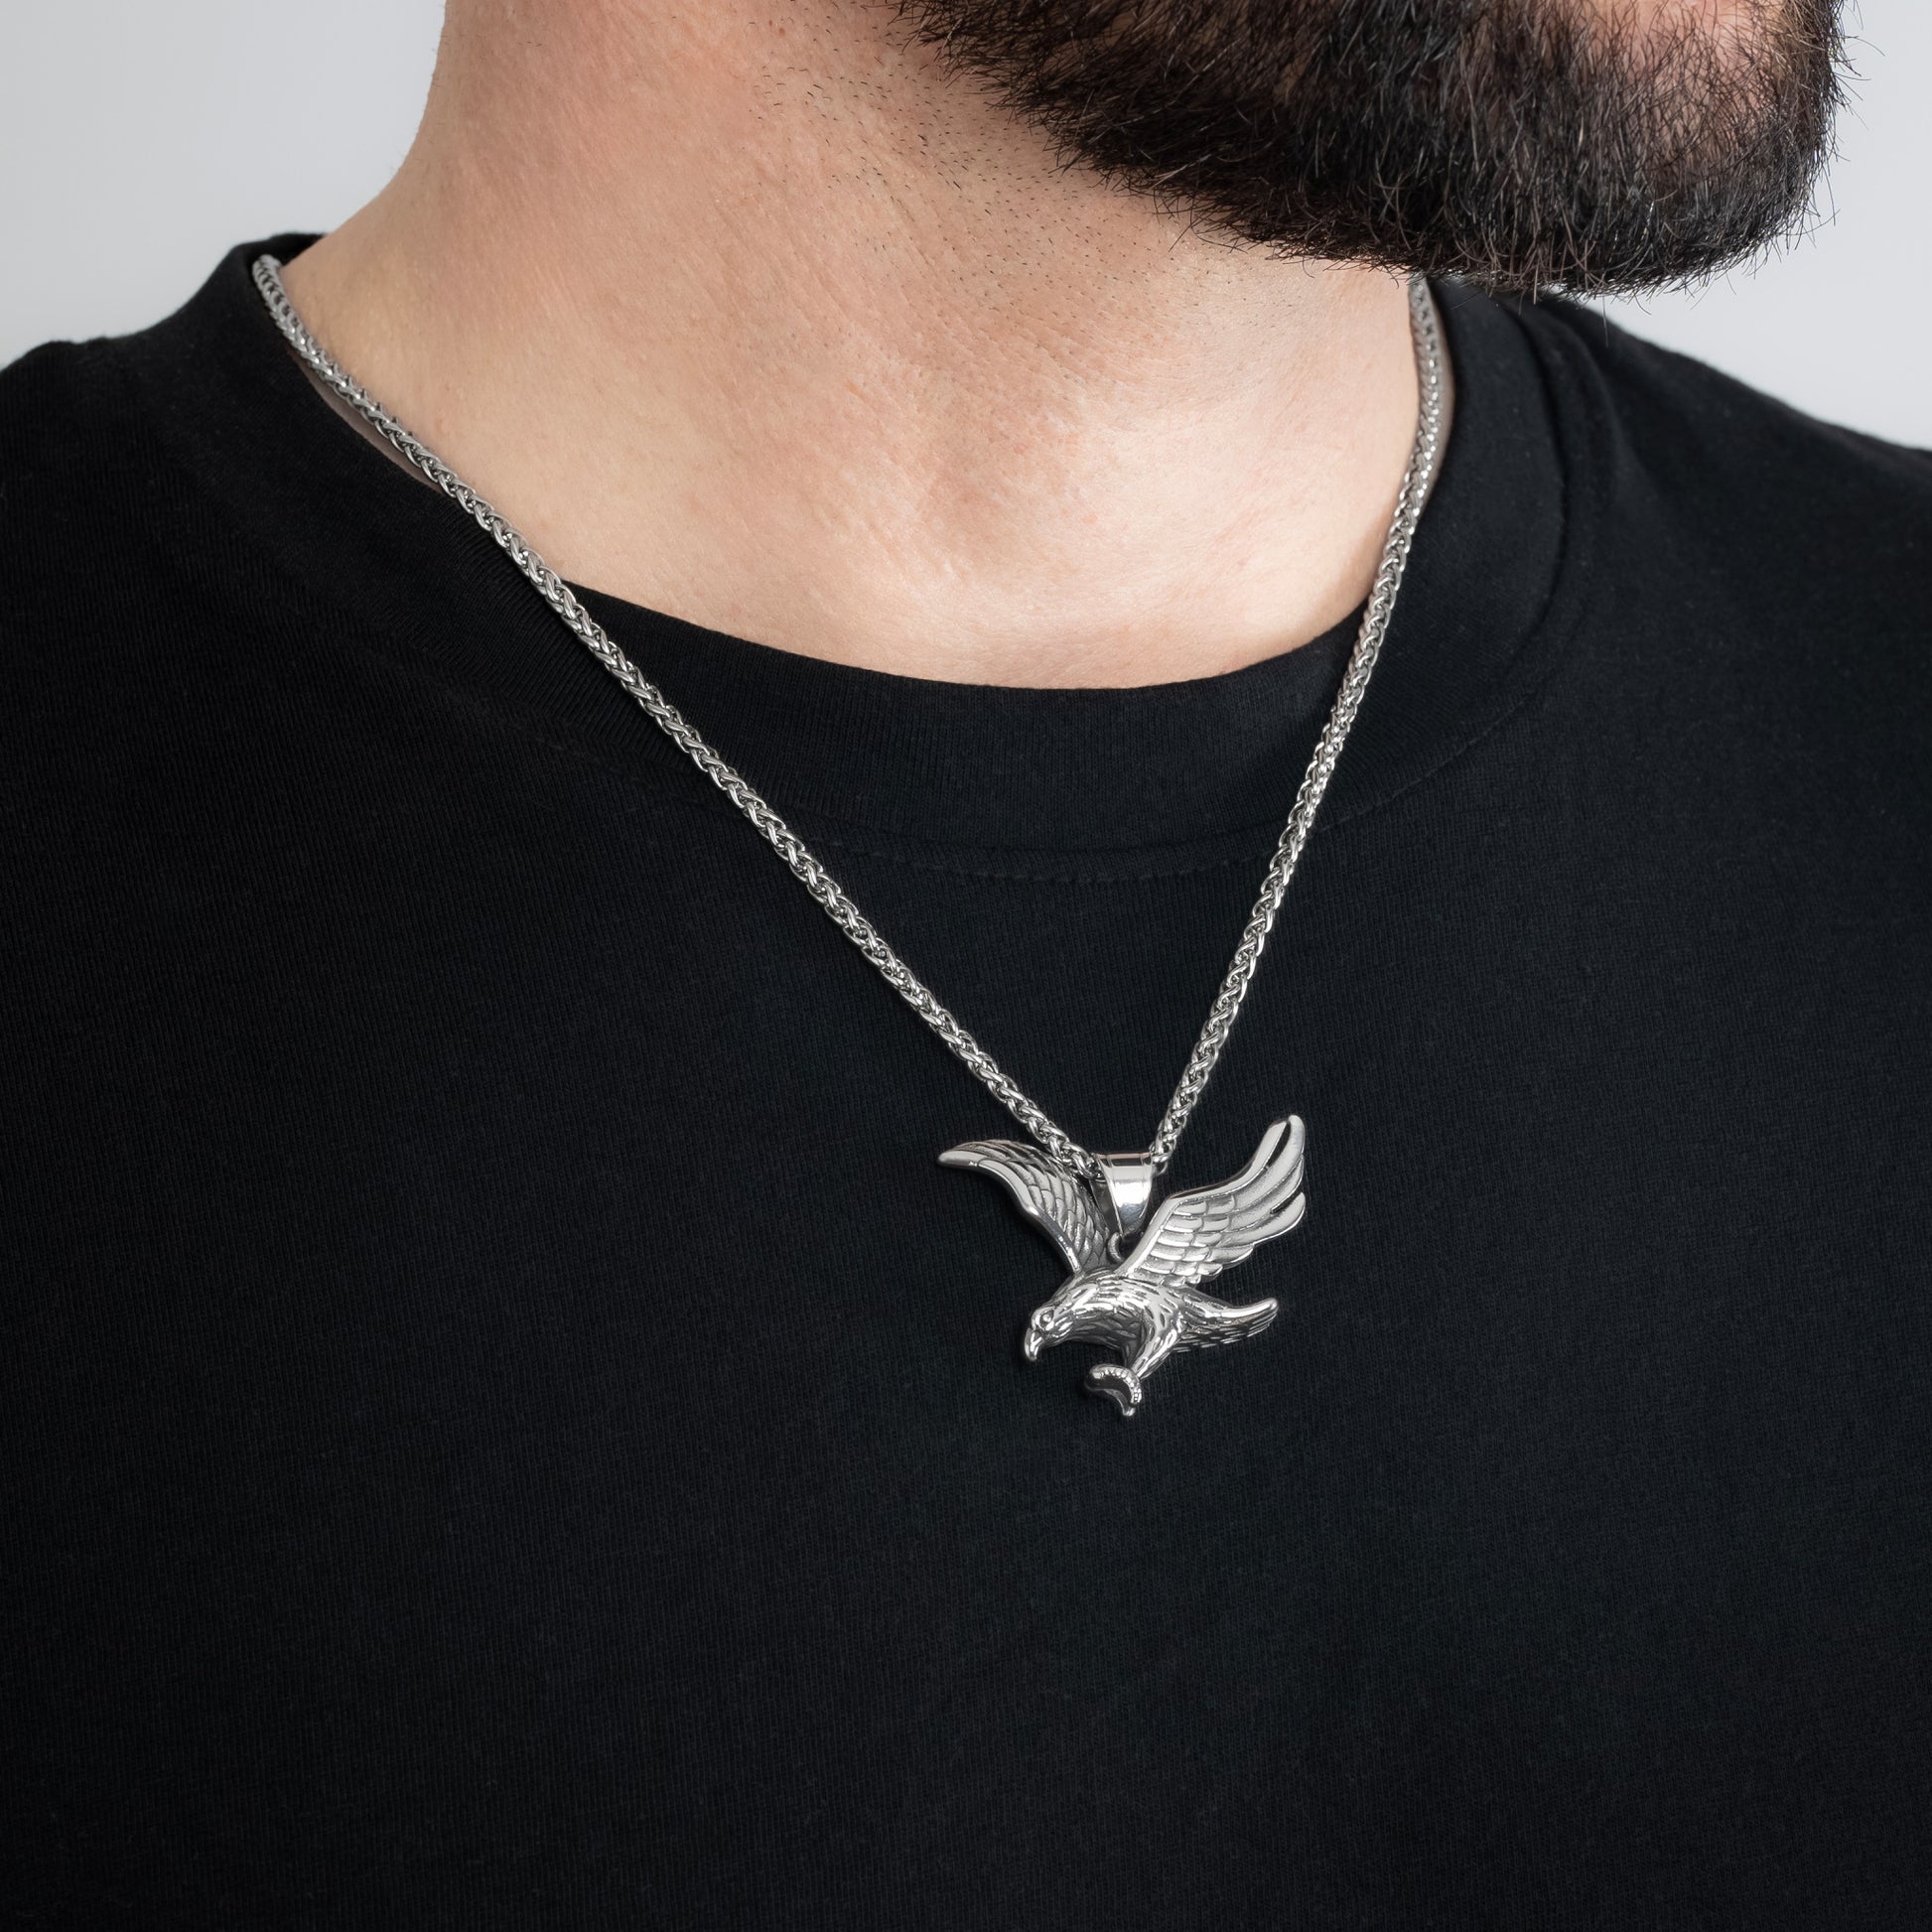 A male model in a black t-shirt wearing a Eagle Silver Pendant with a 3mm Spiga (Wheat) Silver chain 22 inches. Close-up image of the tarnish-free, sweatproof and waterproof powerful men's necklace.